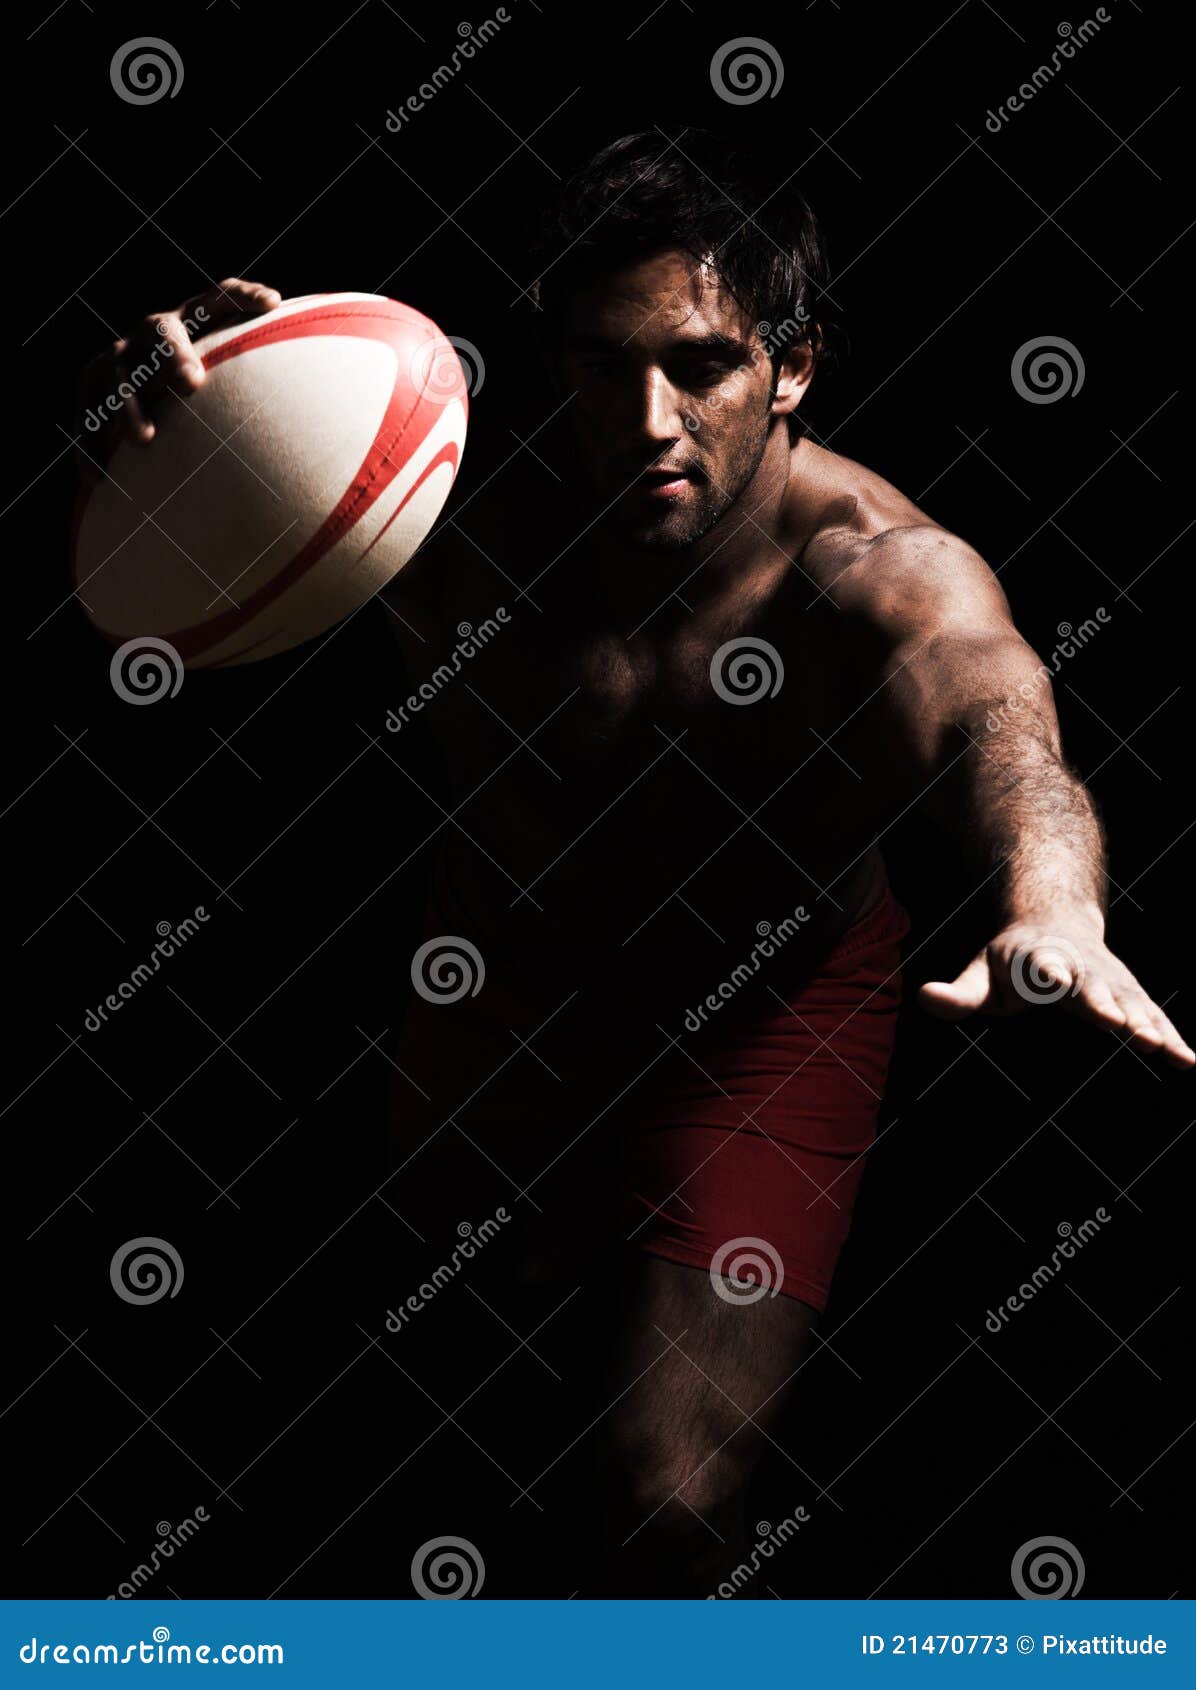 topless rugby man scoring touchdown